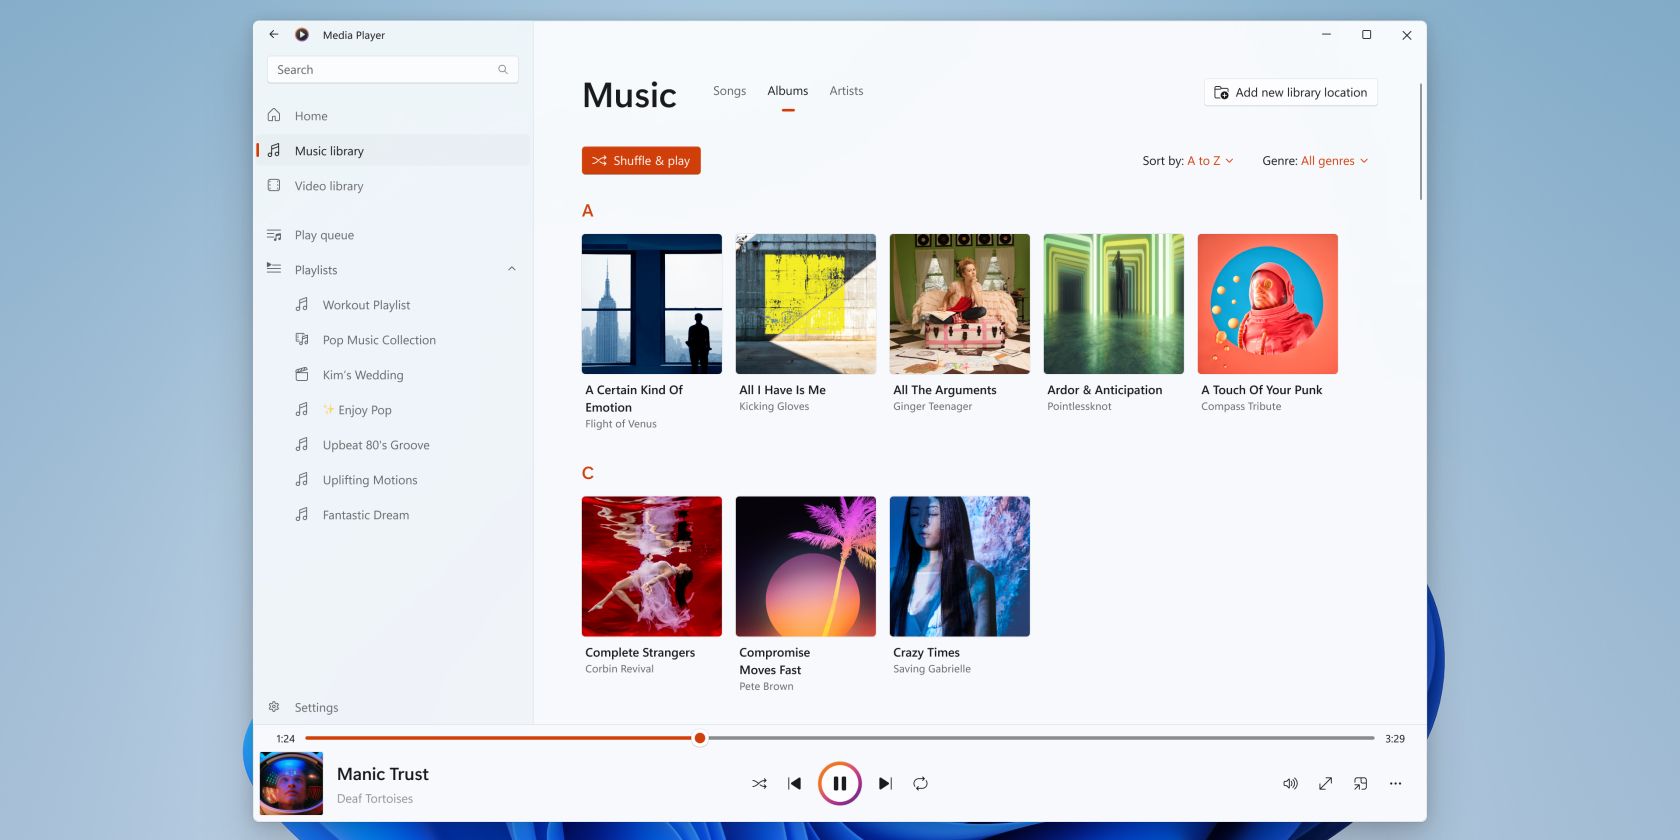 good free media player for windows 10 than can burn cd